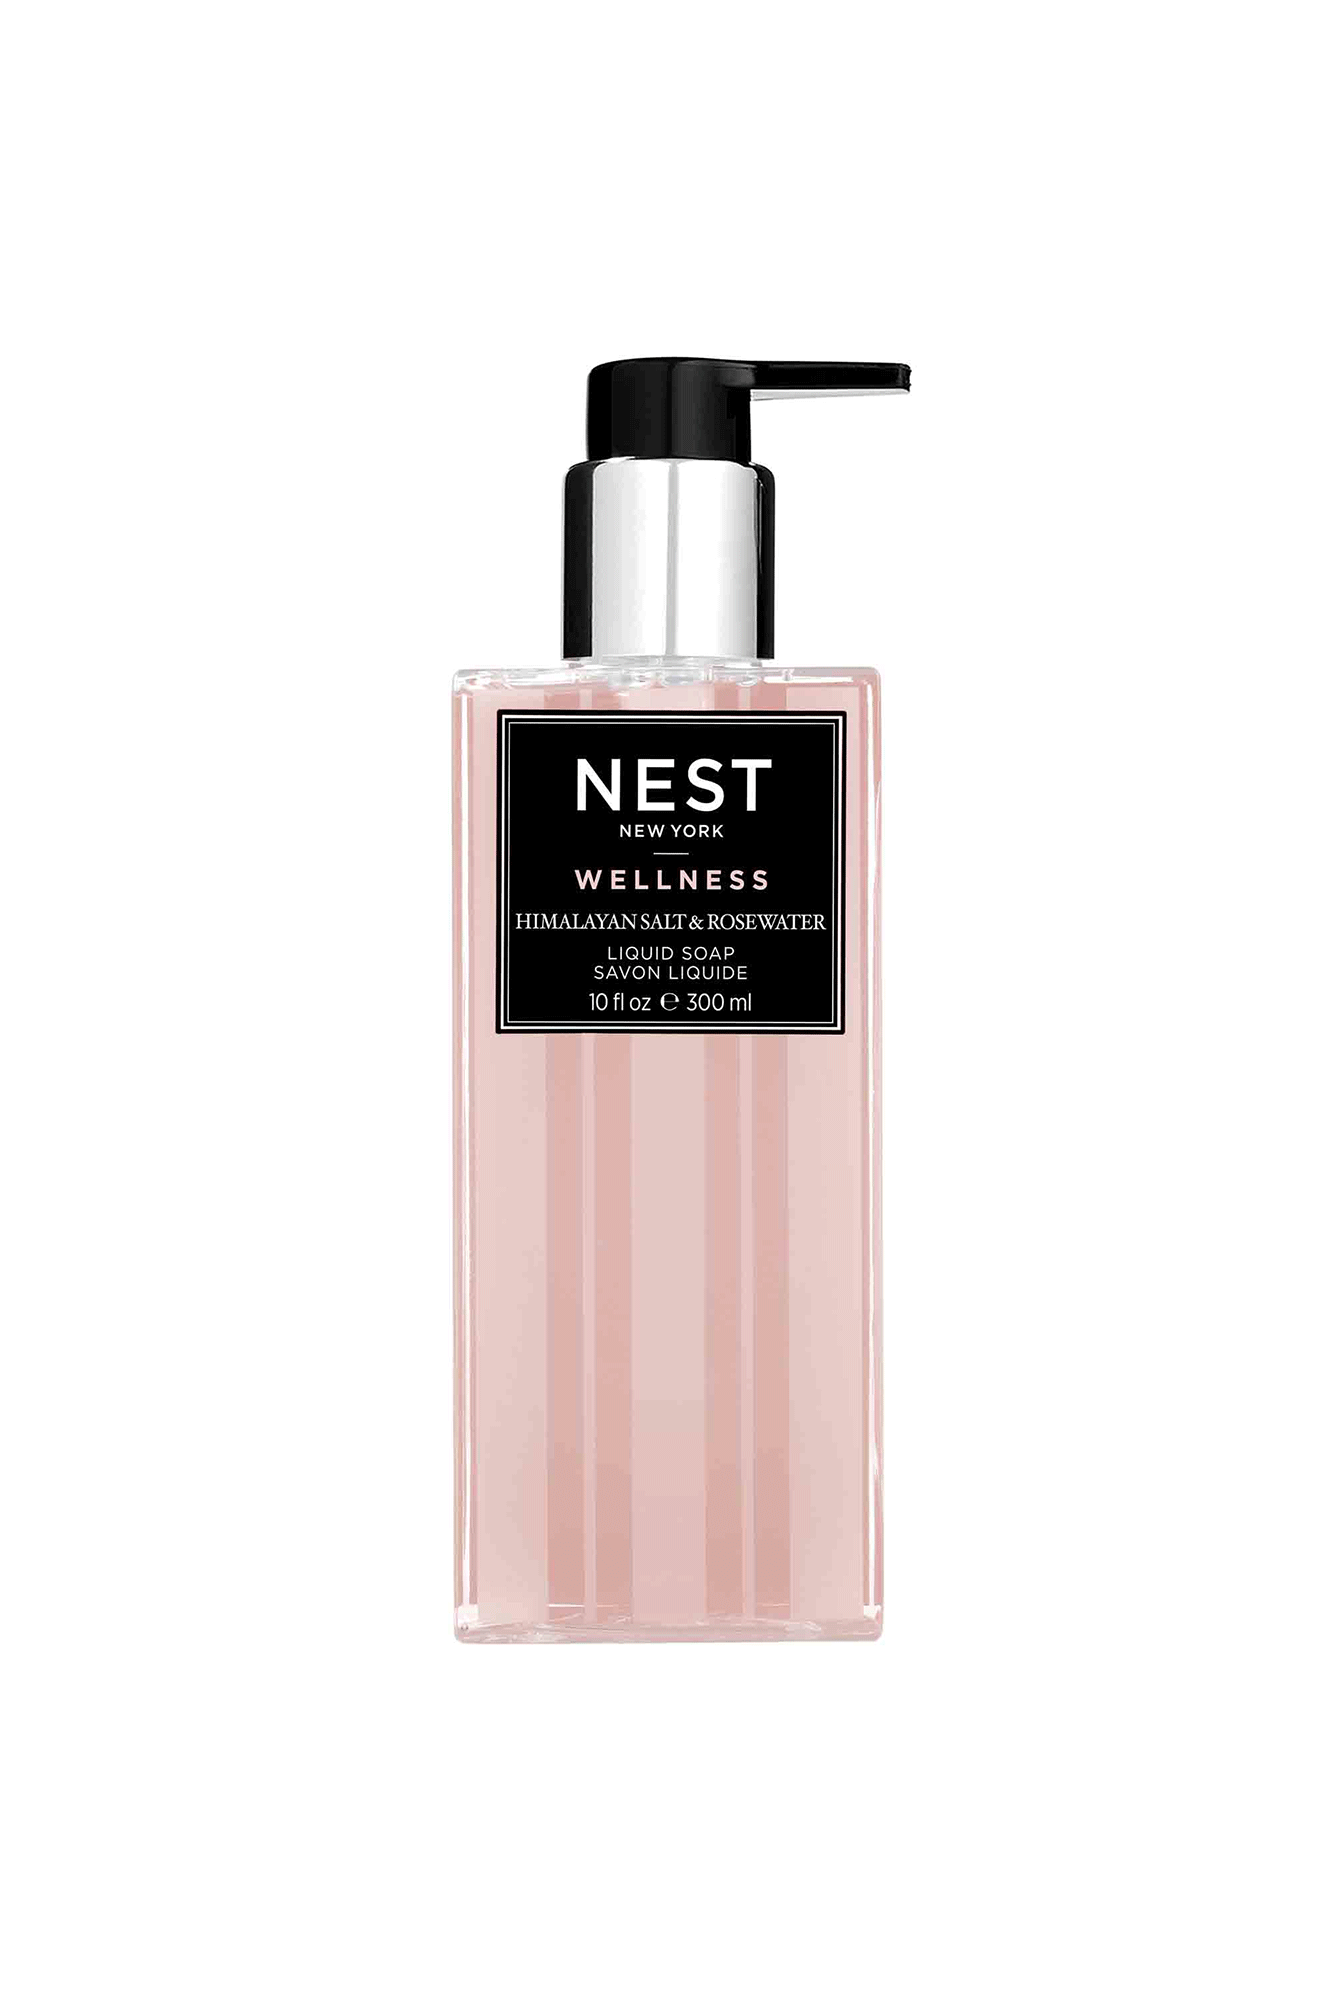 This Liquid Soap from Nest is enriched with stimulating Himalayan salt and natural rosewater to relax the mind and body. With 300 pumps per bottle, enjoy aromas of geranium, salted amber, and white woods every time you wash your hands.